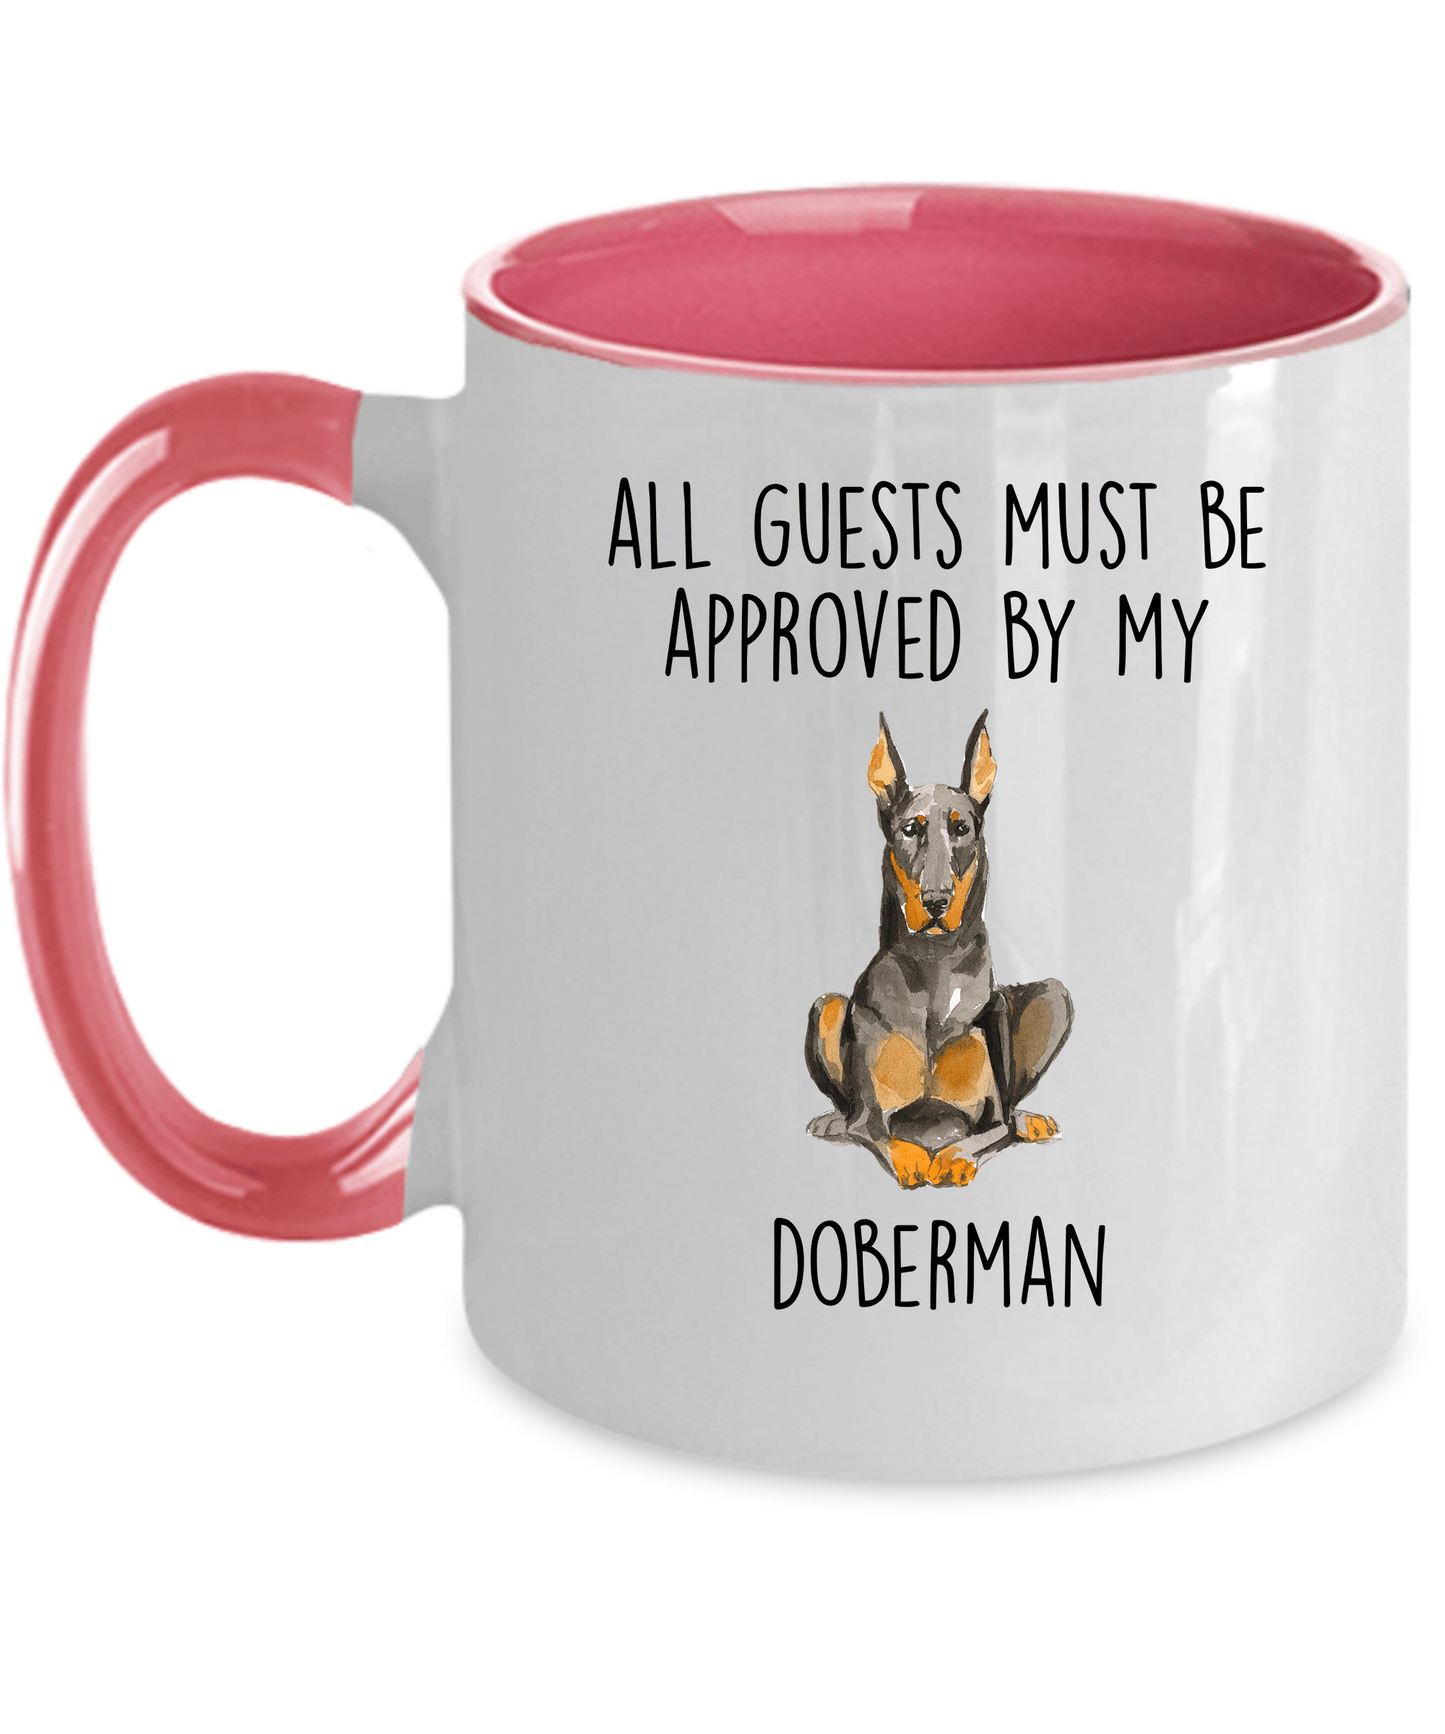 Doberman Pinscher Funny Dog Ceramic Coffee Mug All Guests must be approved